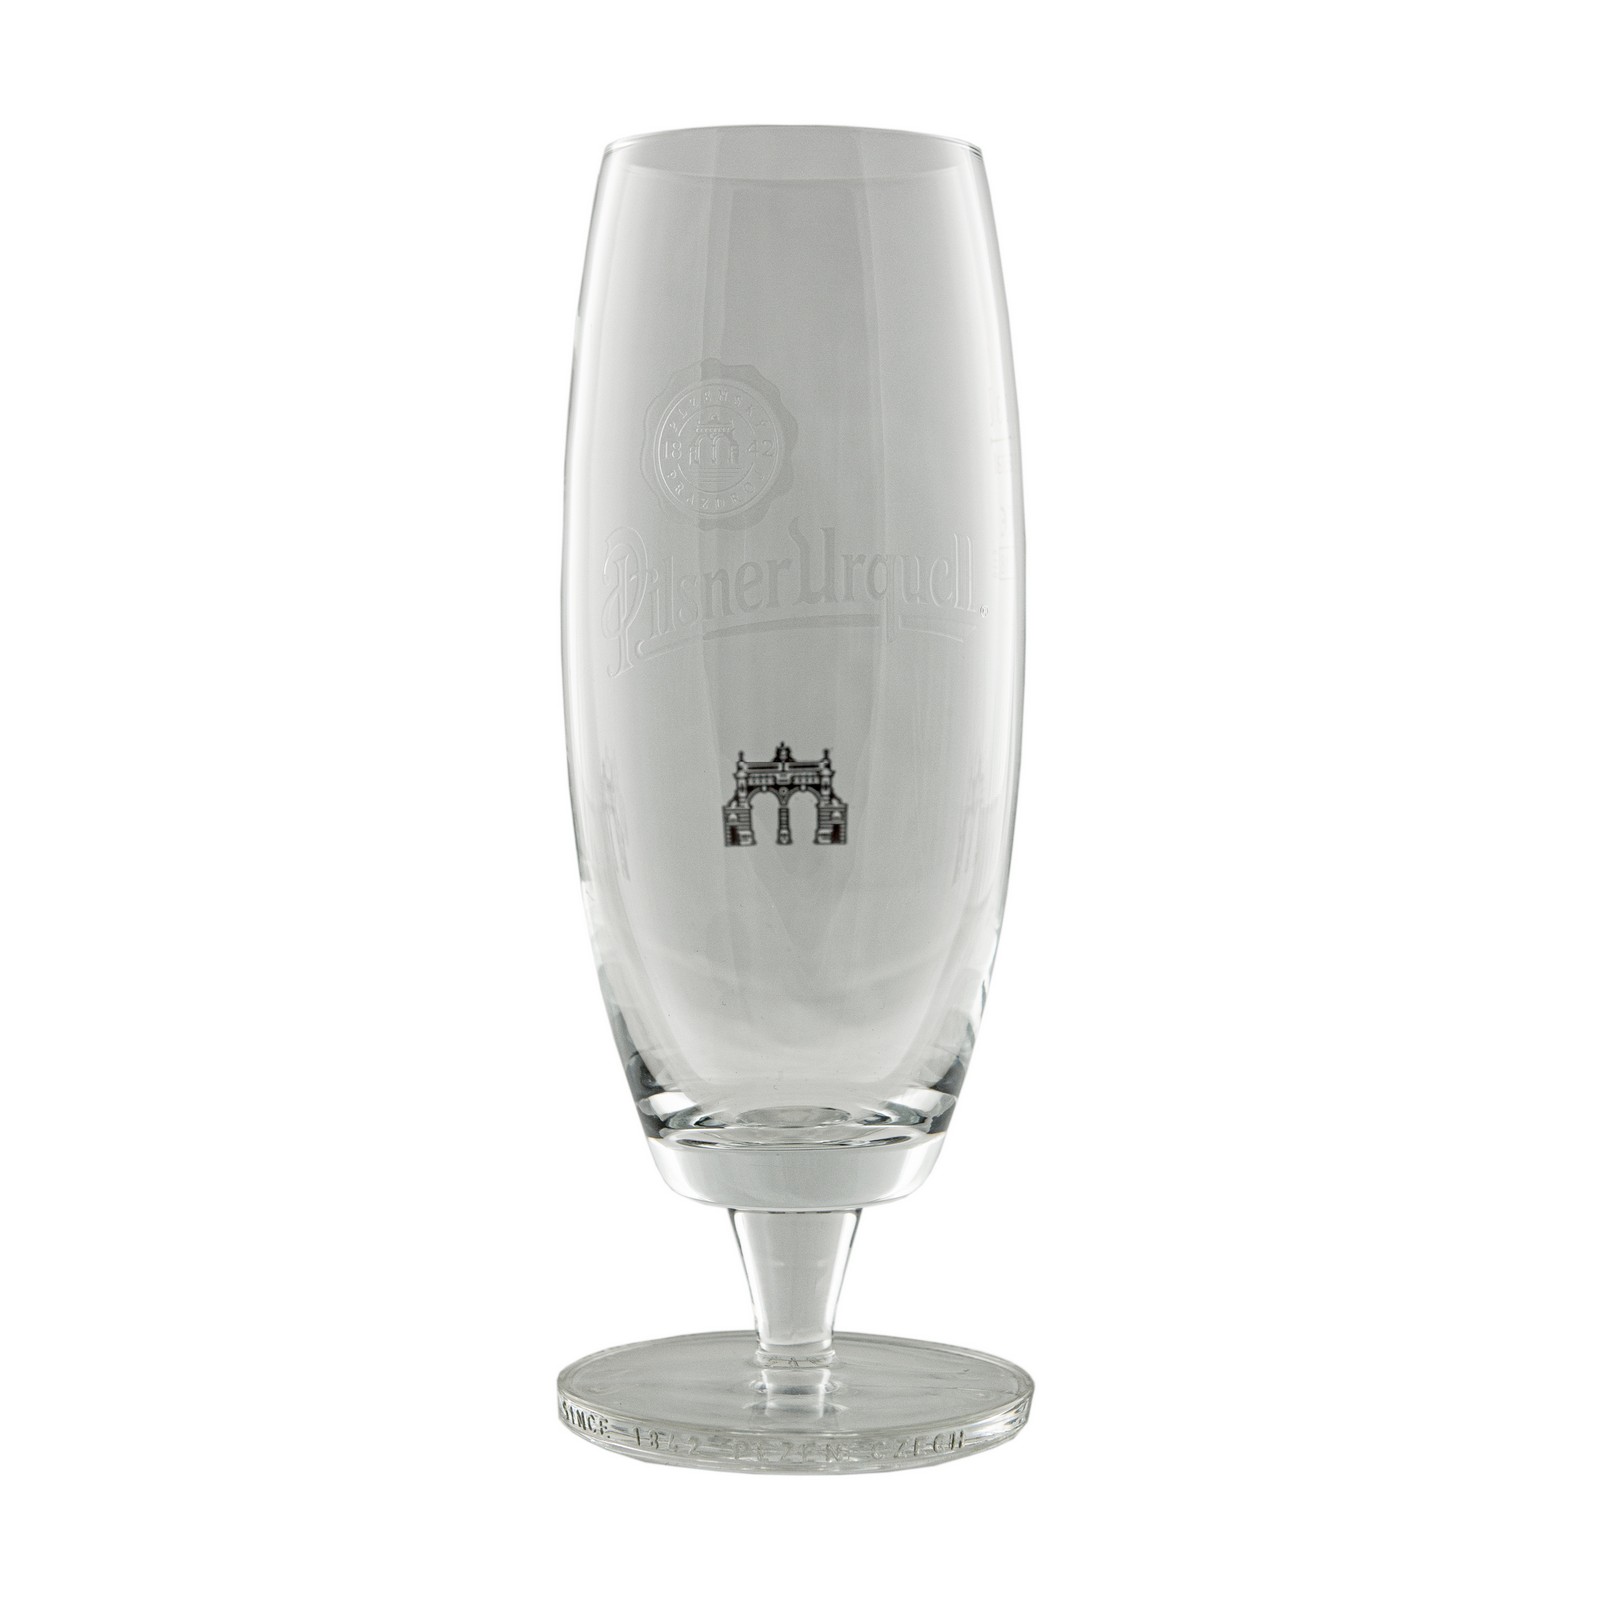 The Goblet Pilsner Urquell glass 0,3l with inscription